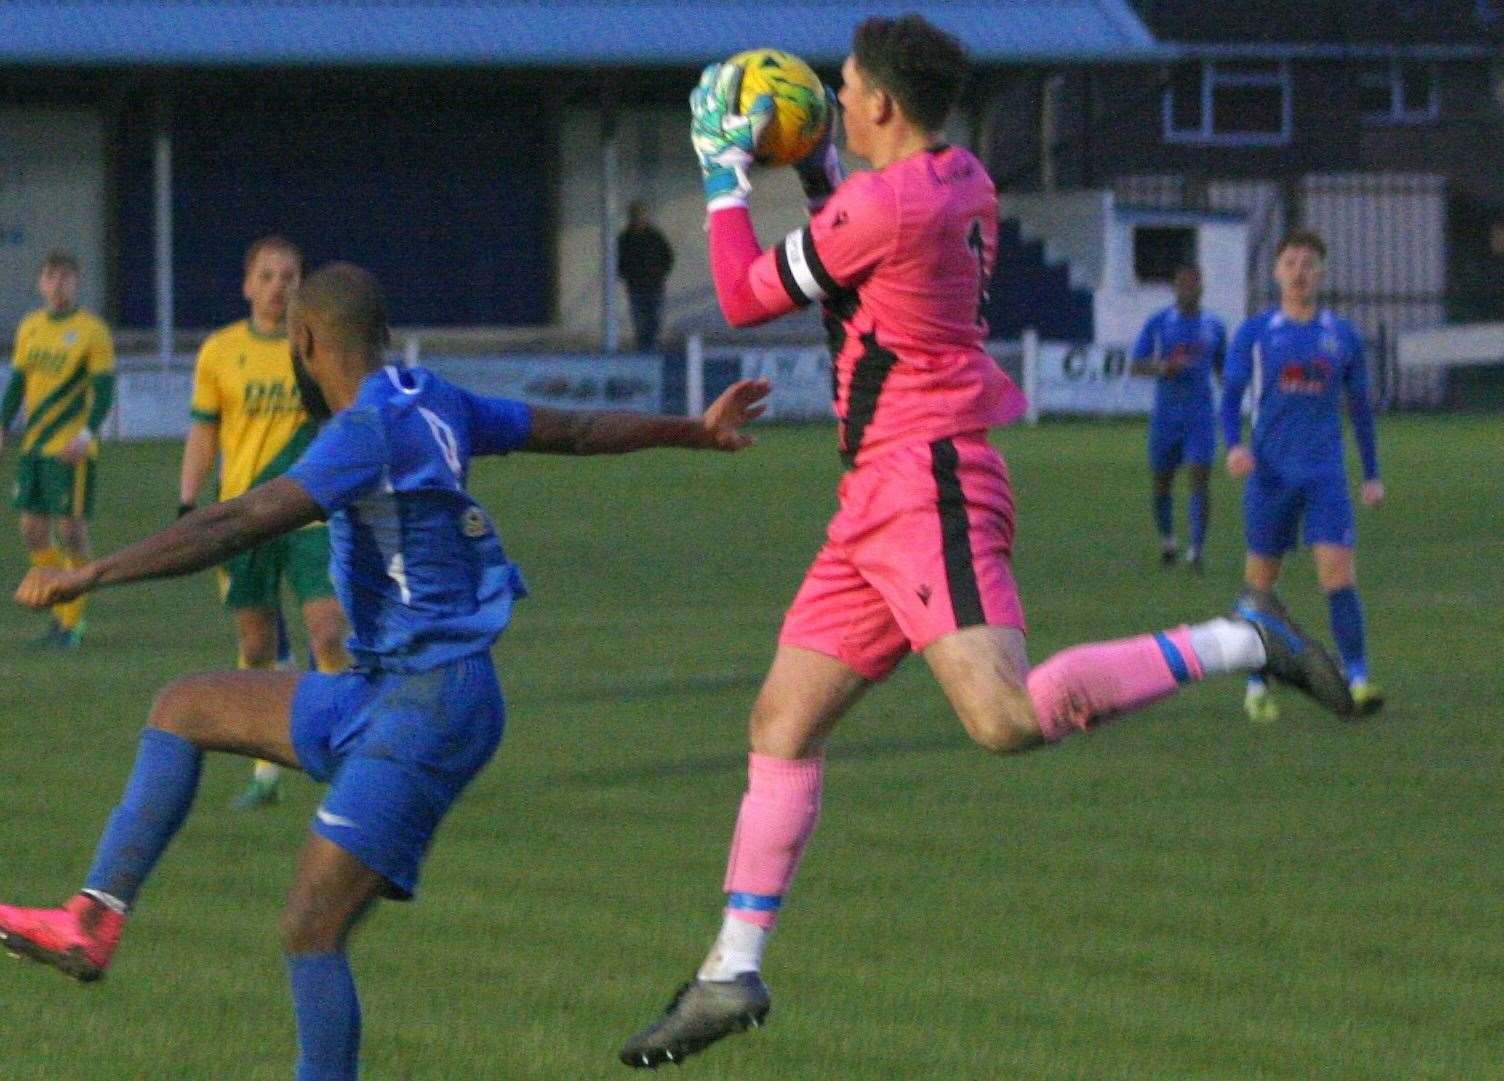 Sam Mott collects the ball against Herne Bay